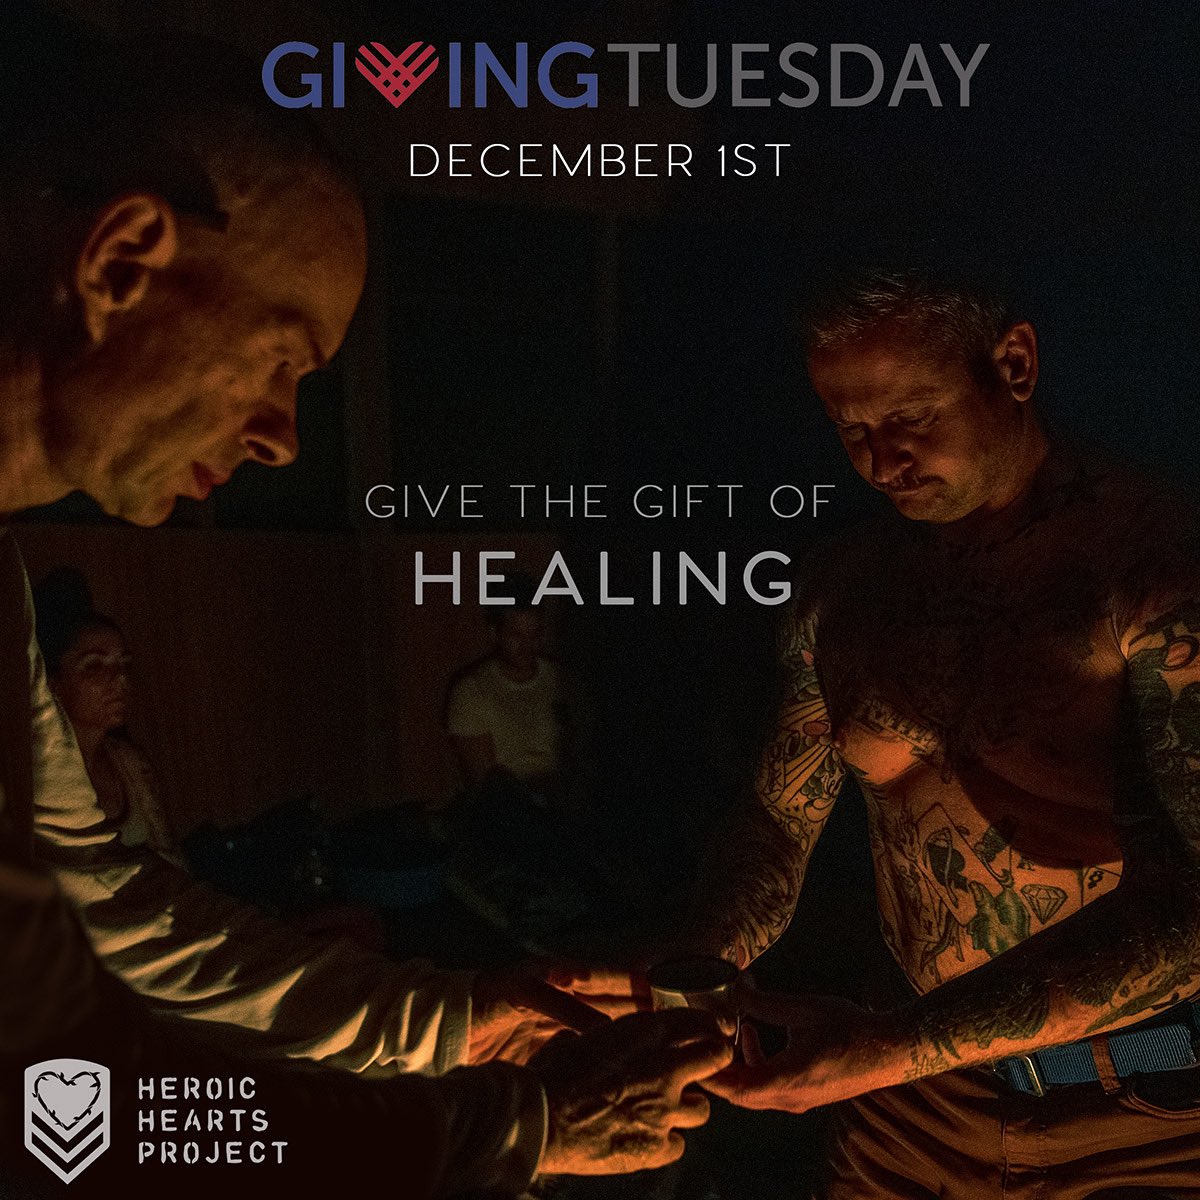 This #GivingTuesday you can help Heroic Hearts Project save veteran lives through effective psychedelic treatments. $10,000 will enable us to affect the lives of TEN Veterans. m.facebook.com/donate/3208270…